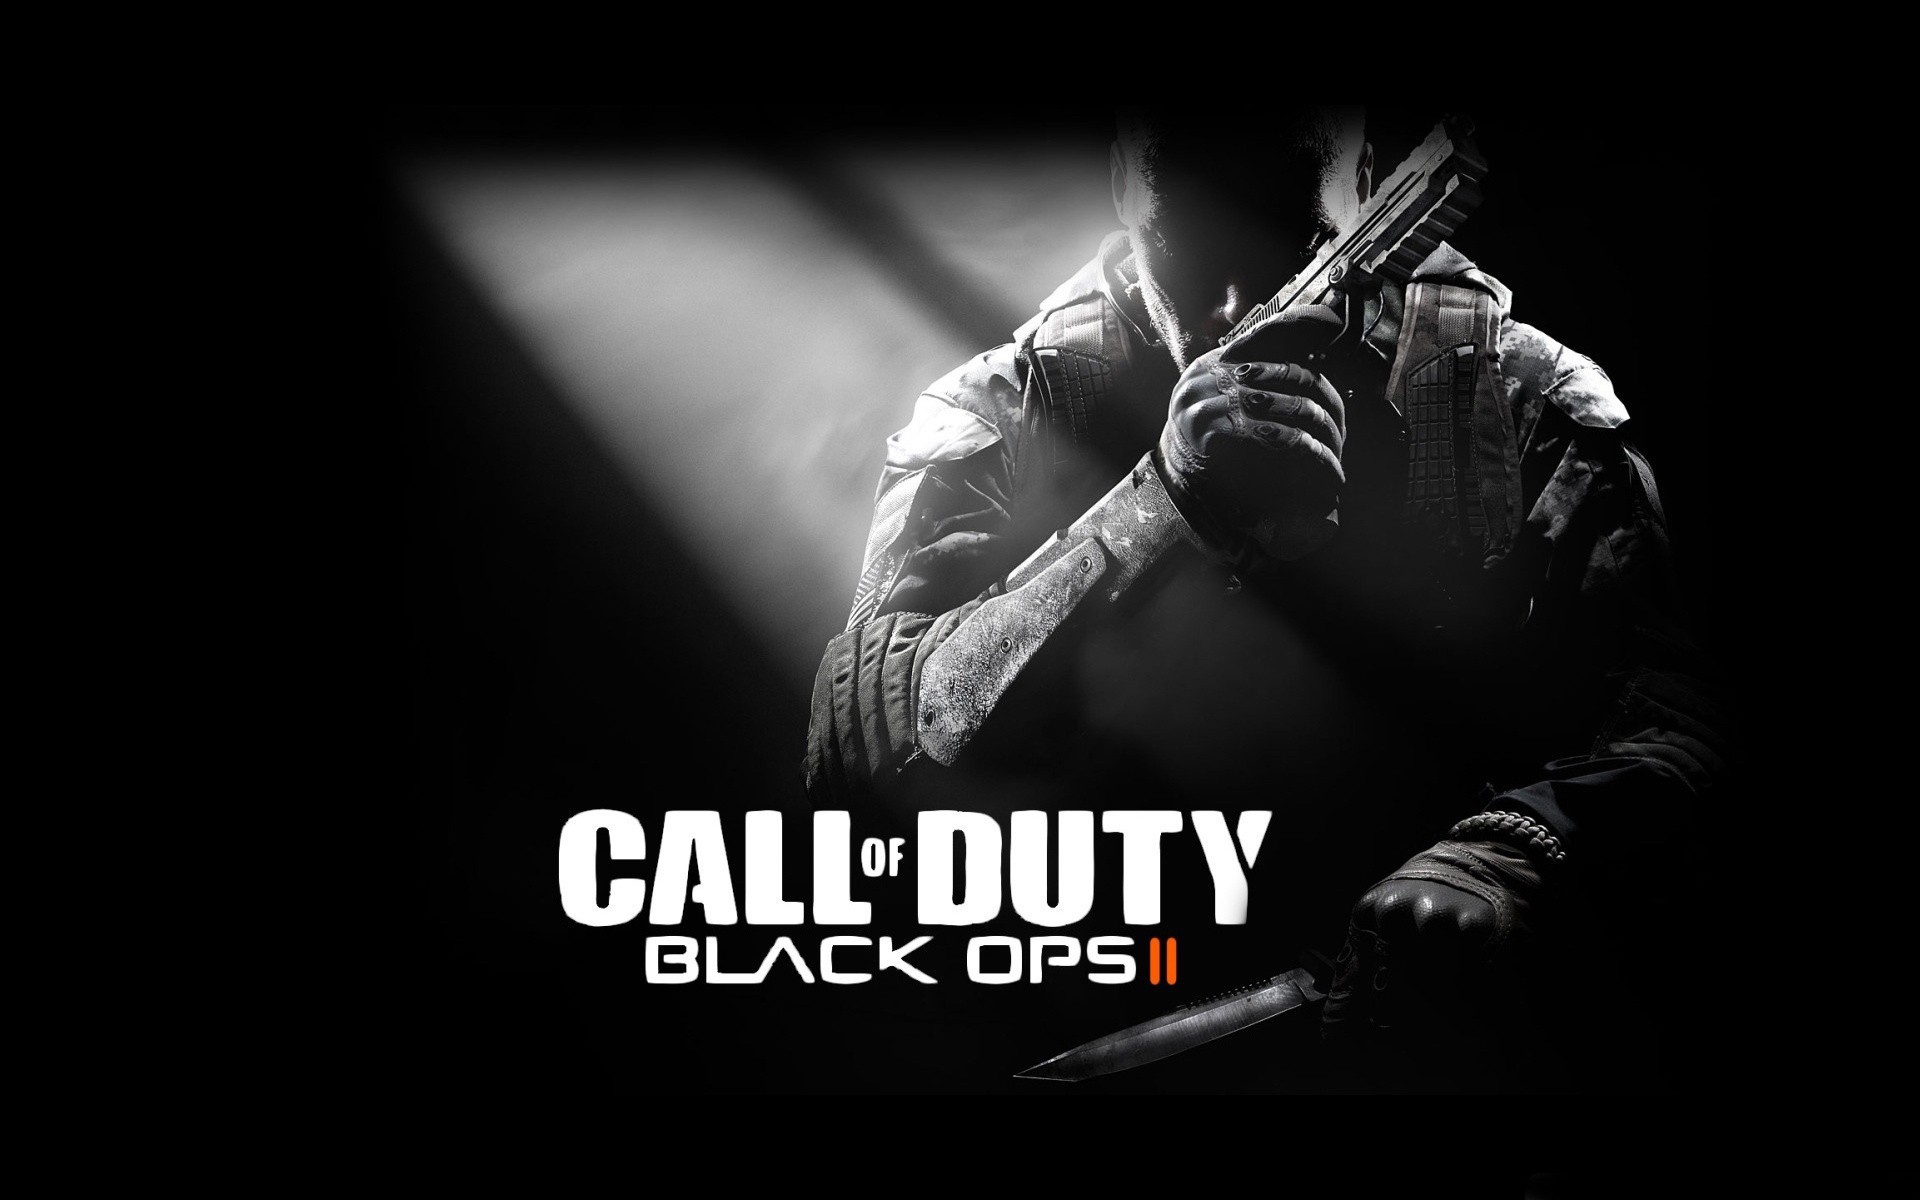 call of duty black ops 2 v1.0.0.1 zombies trainer